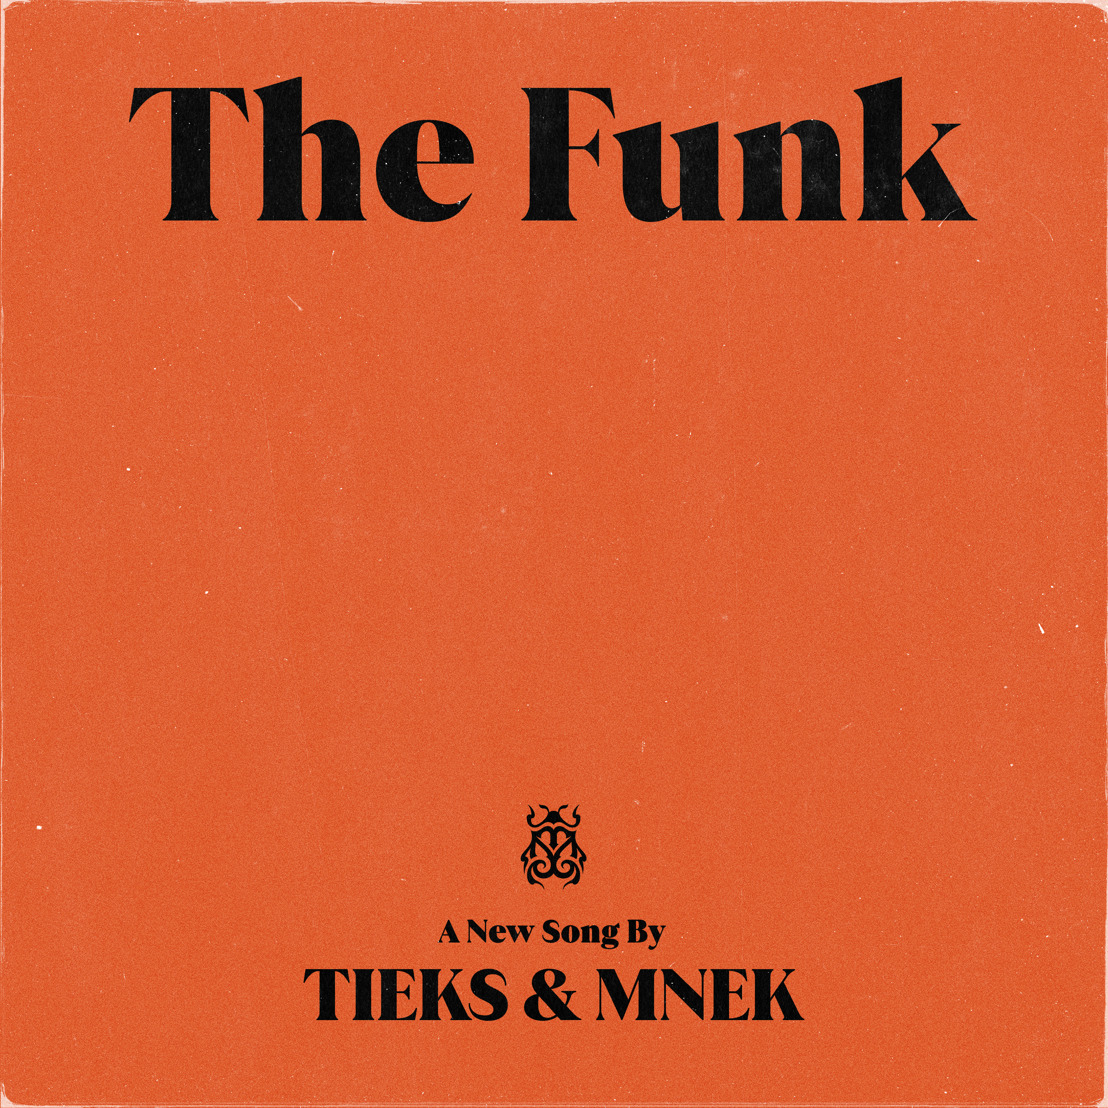 TIEKS and MNEK raise the bar with new disco tinged single ‘The Funk’